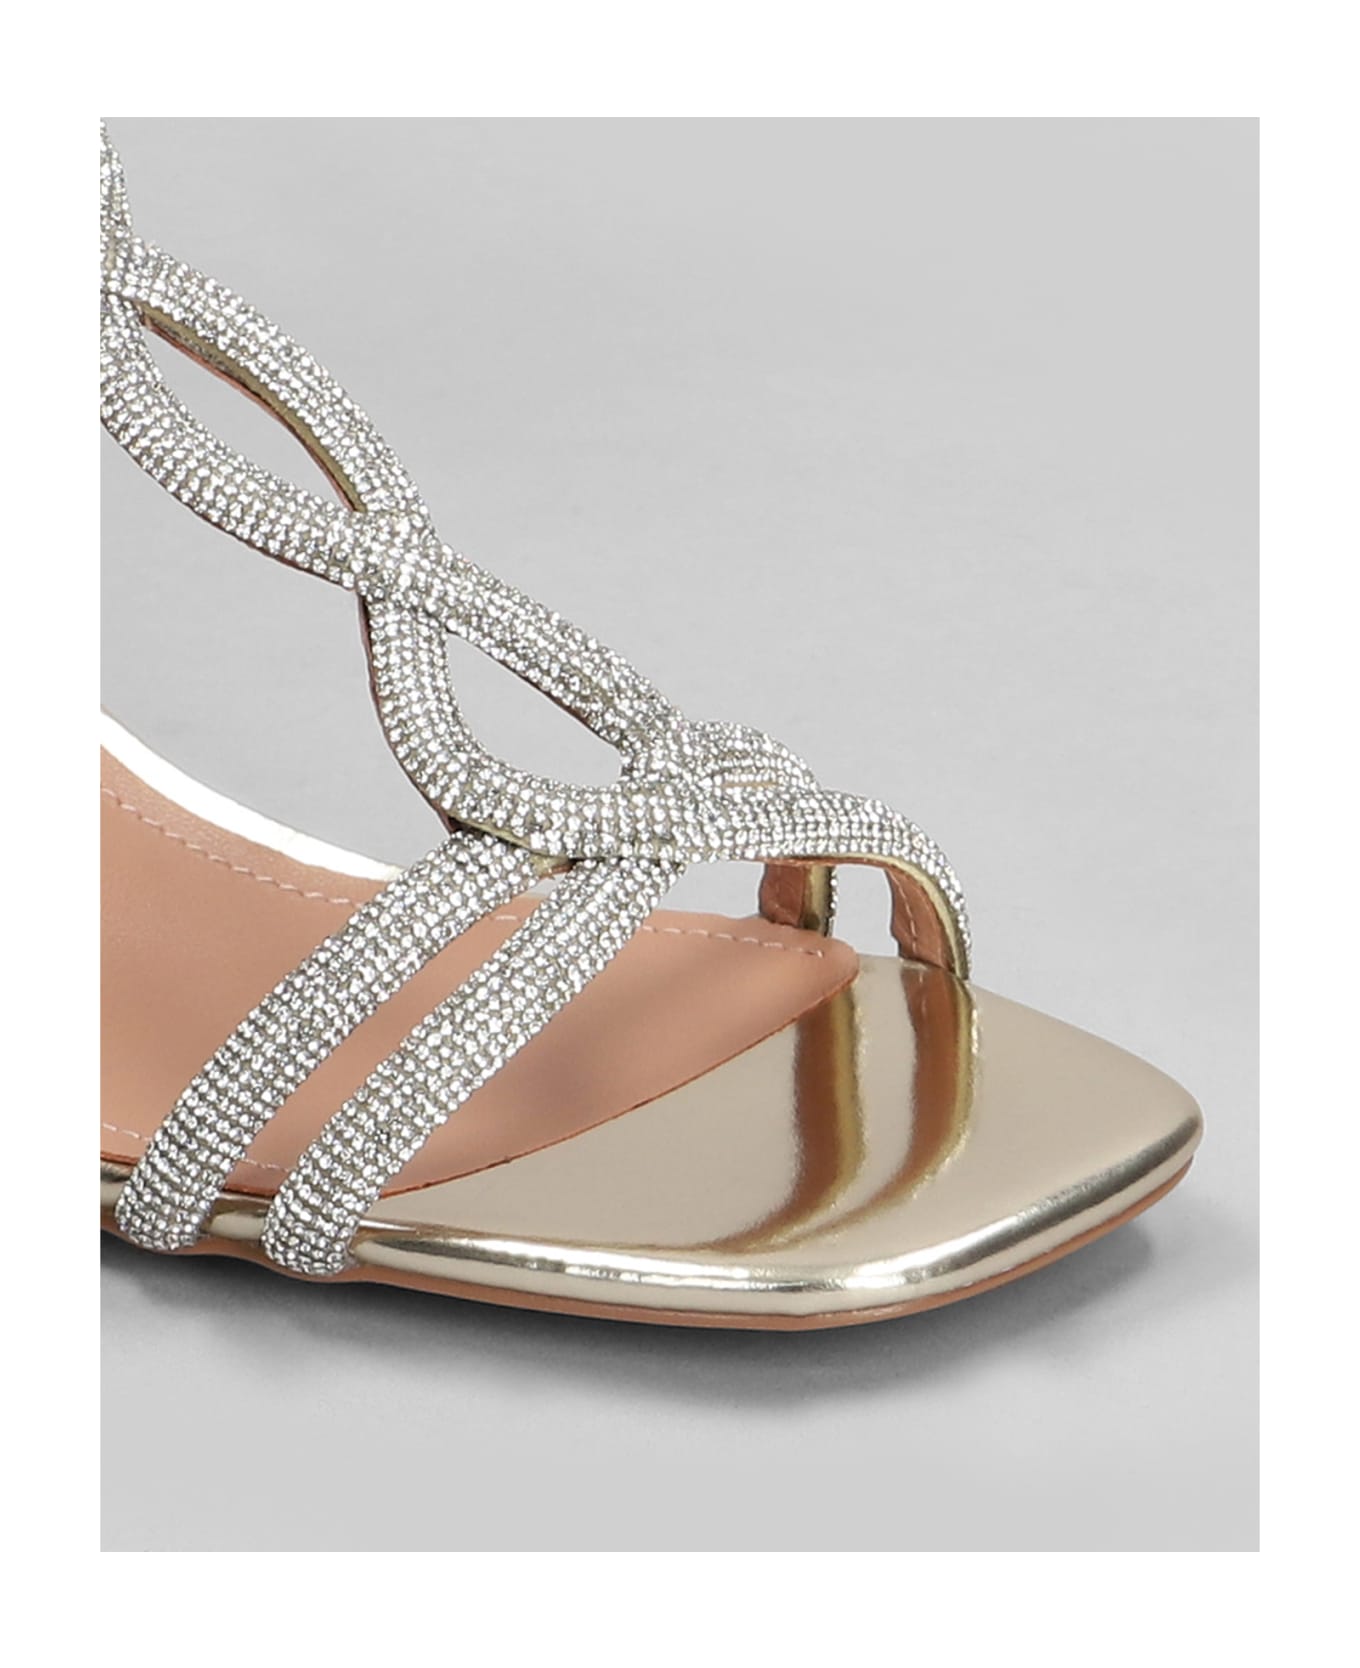 Bibi Lou Tansy 60 Sandals In Gold Leather - gold